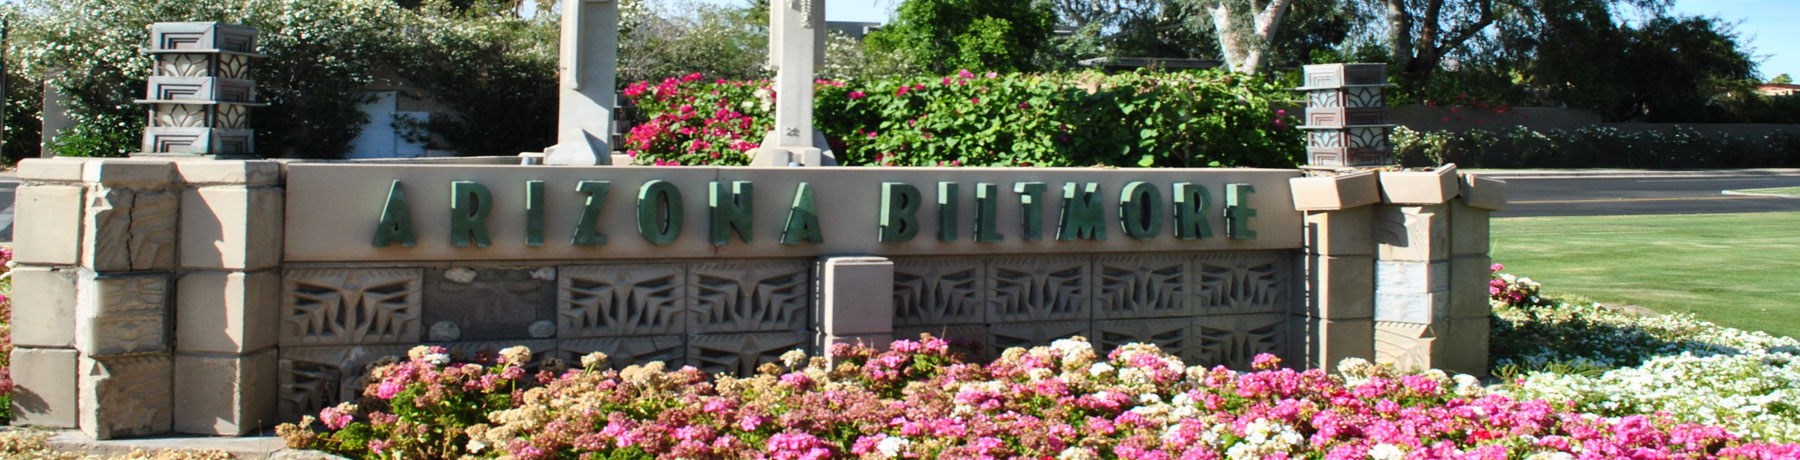 About The Phoenix Biltmore Area